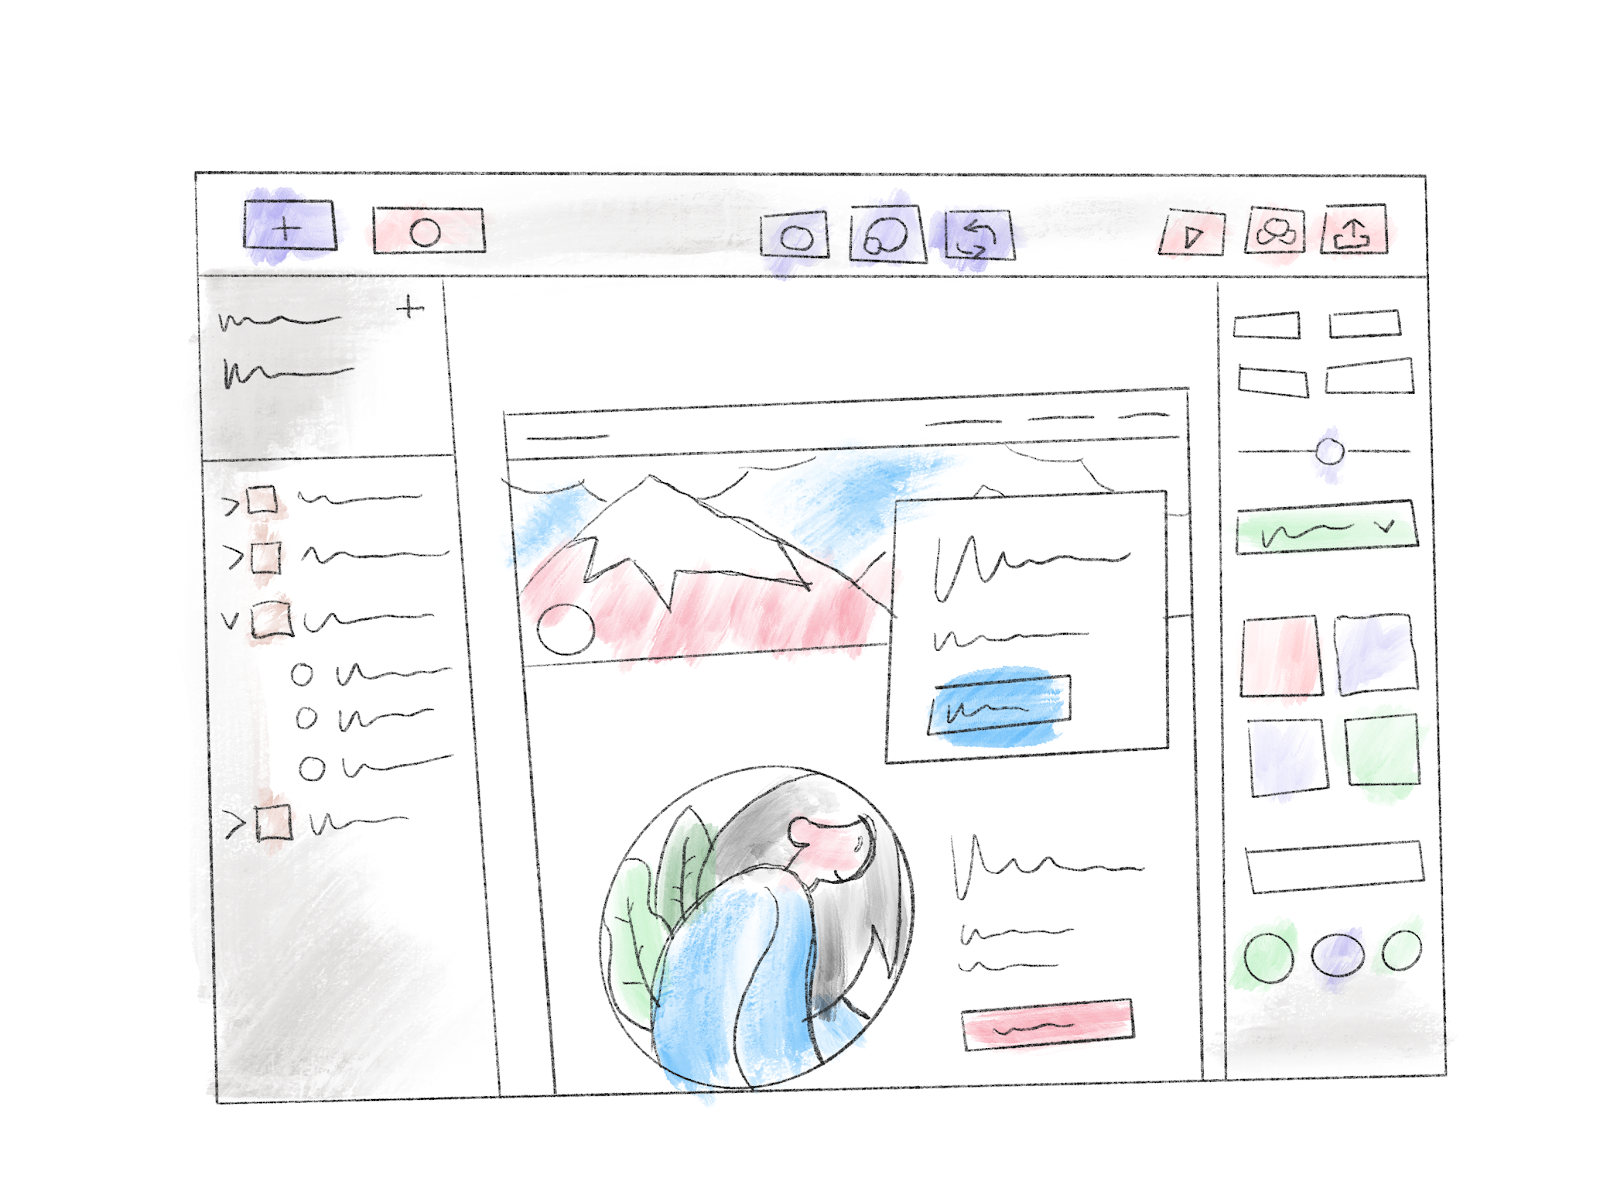 Illustration of a Web page or user interface